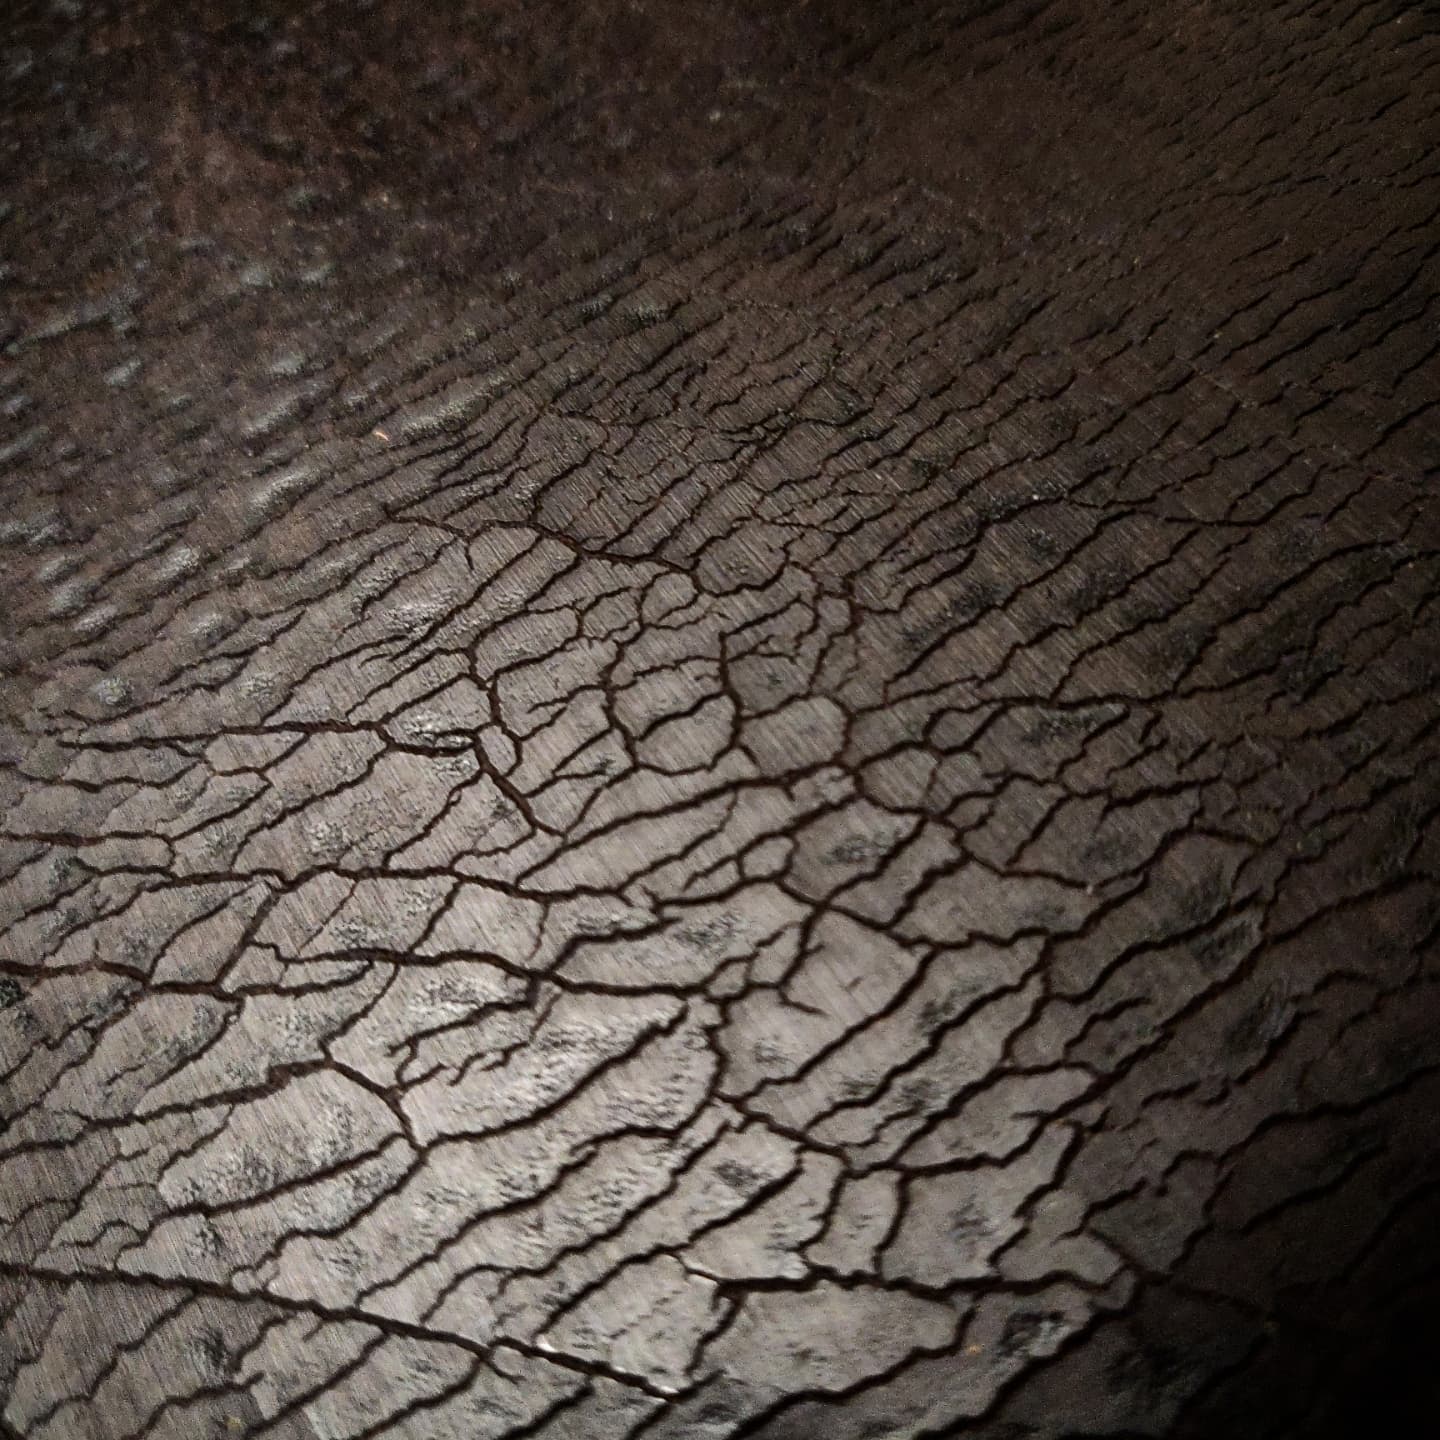 Detailed view of the cracked leather almost with the same feel and look to it as cracked dry soil